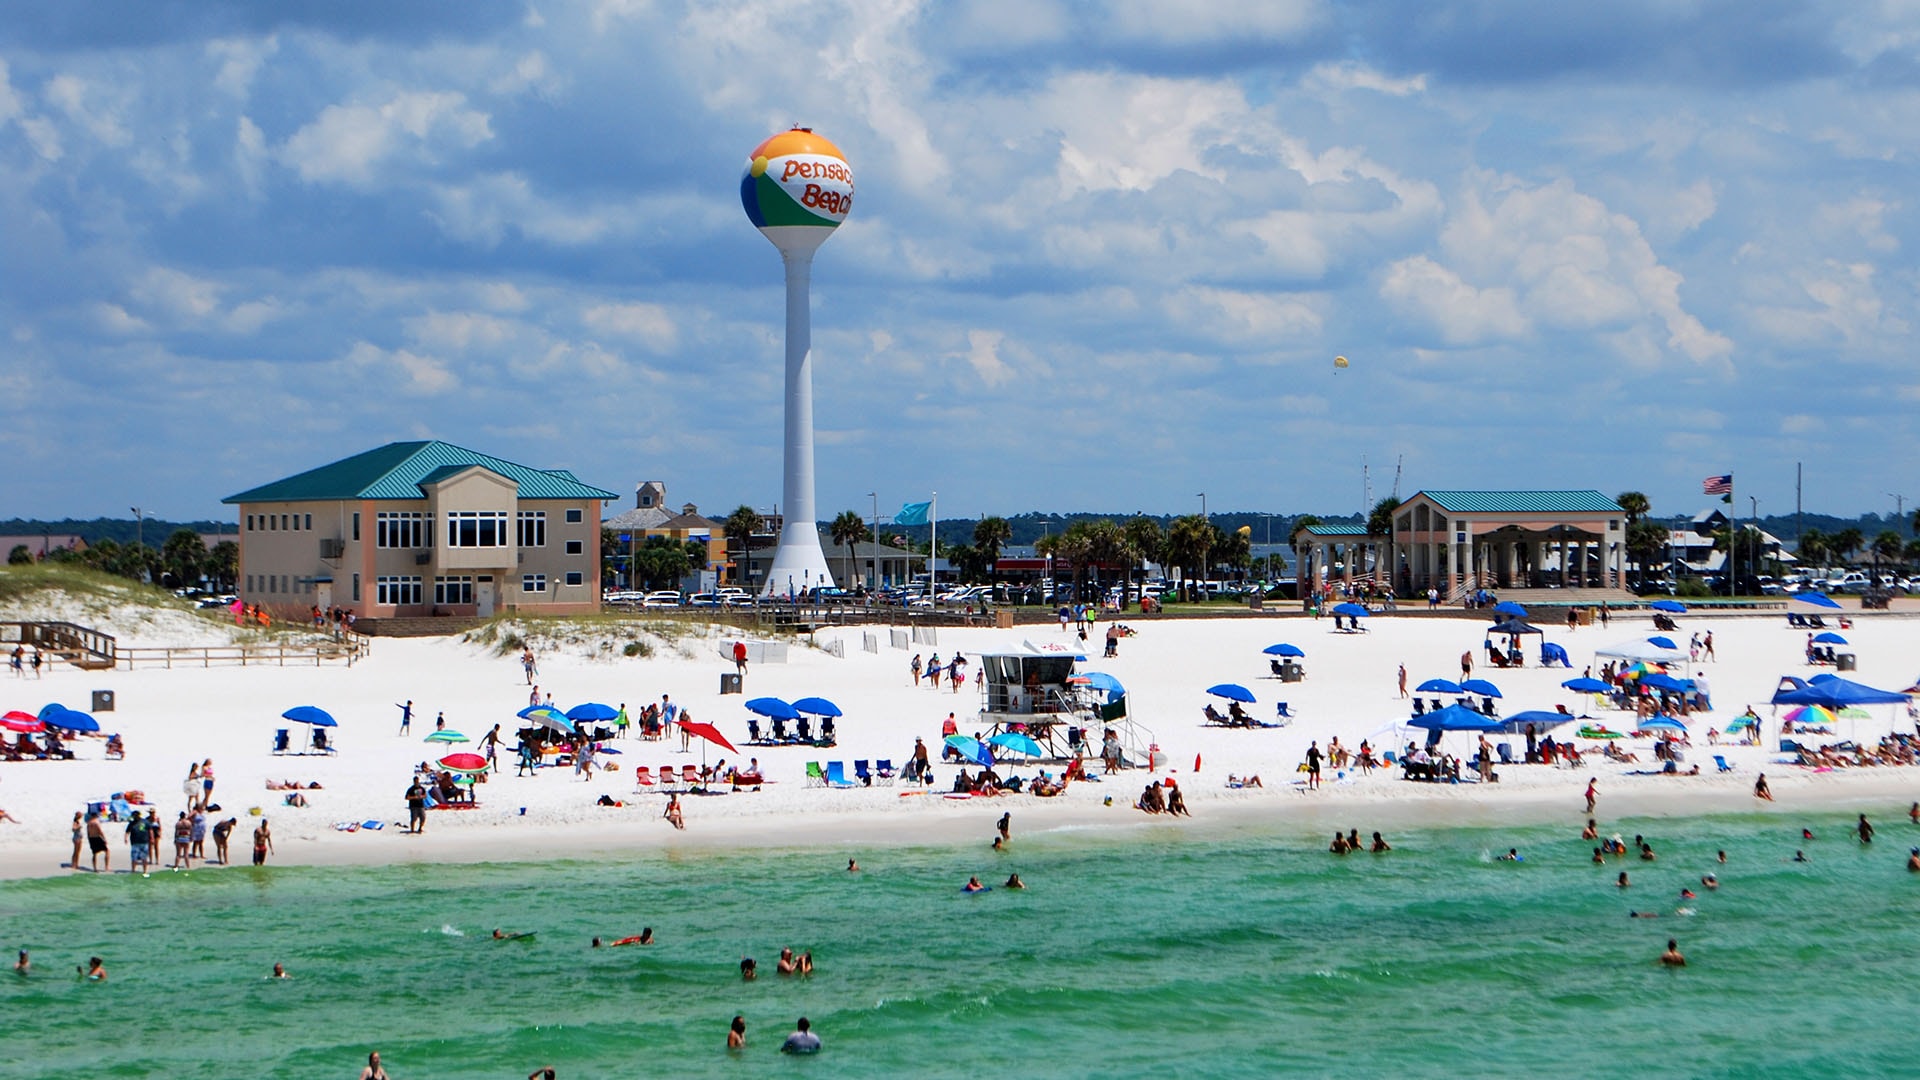 The beach ball water tower is a symbol of Pensacola Beach.